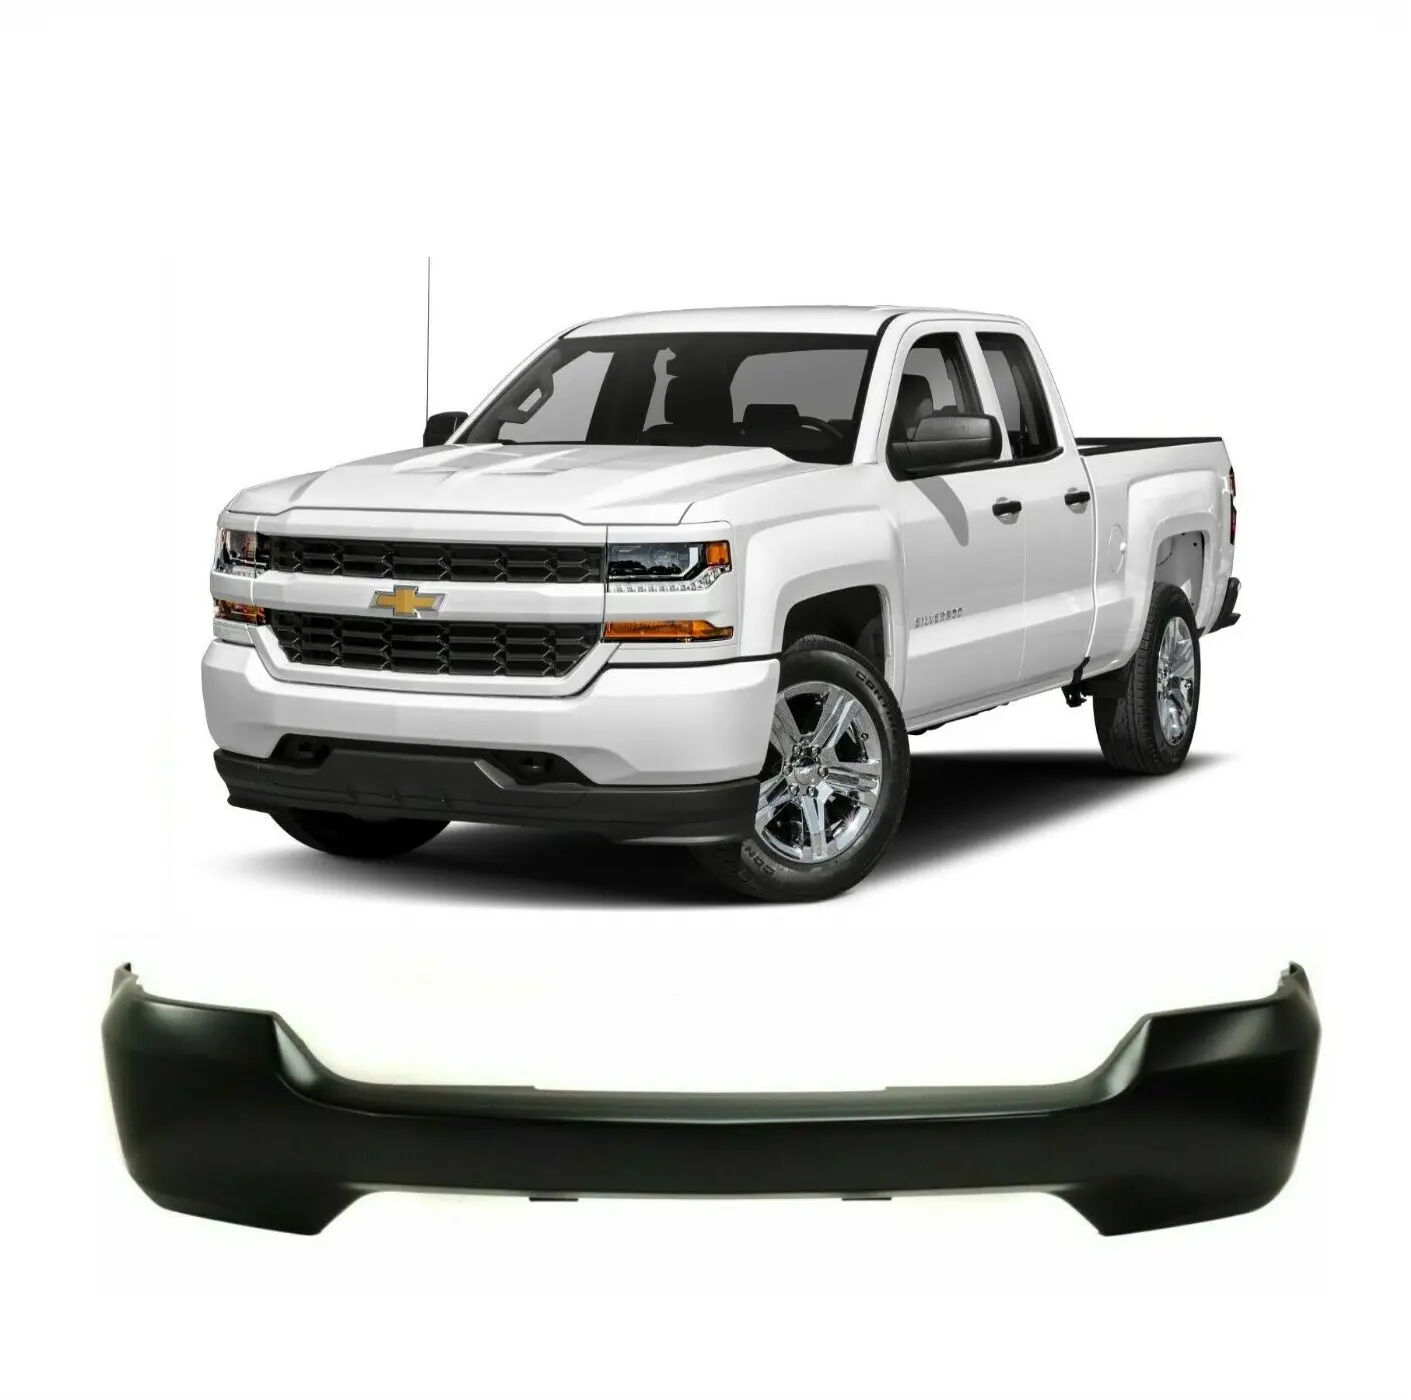 USA In Stock NEW Front Bumper For 2016-2018 Chevrolet Silverado 1500 Without Fogs